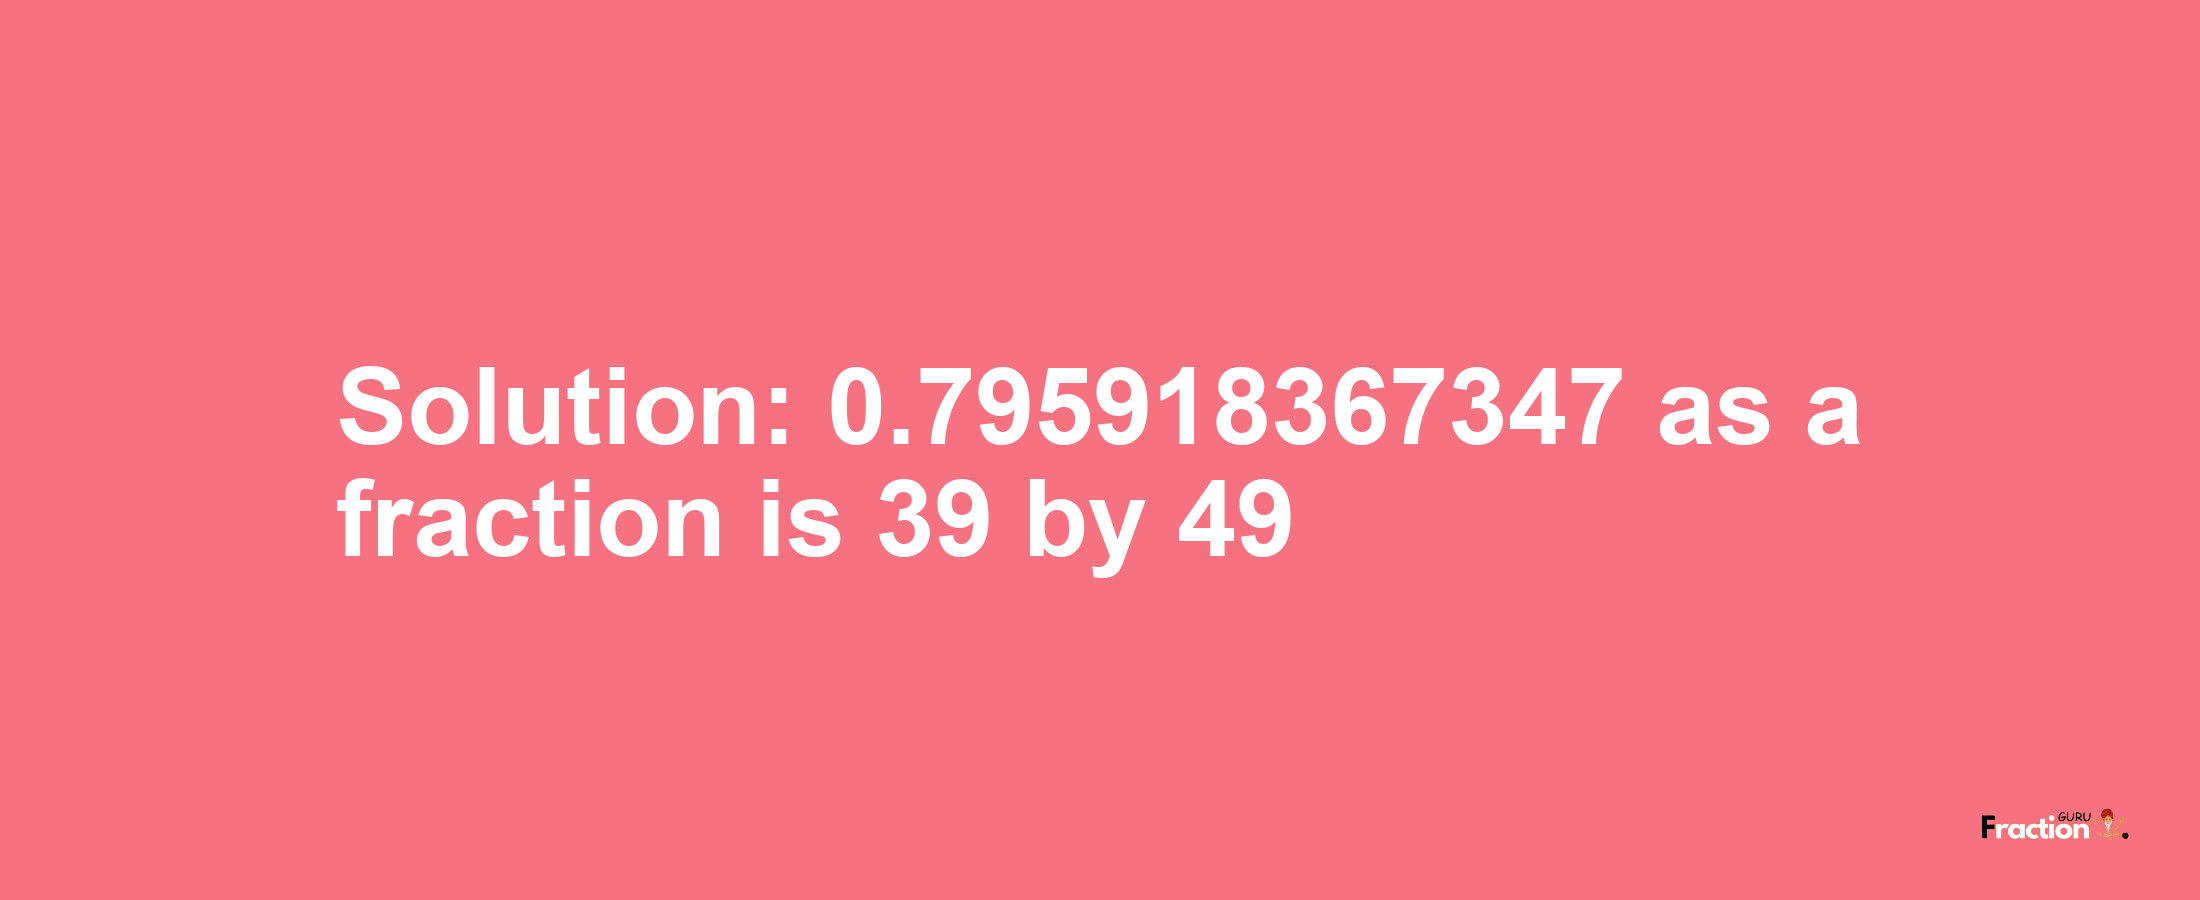 Solution:0.795918367347 as a fraction is 39/49